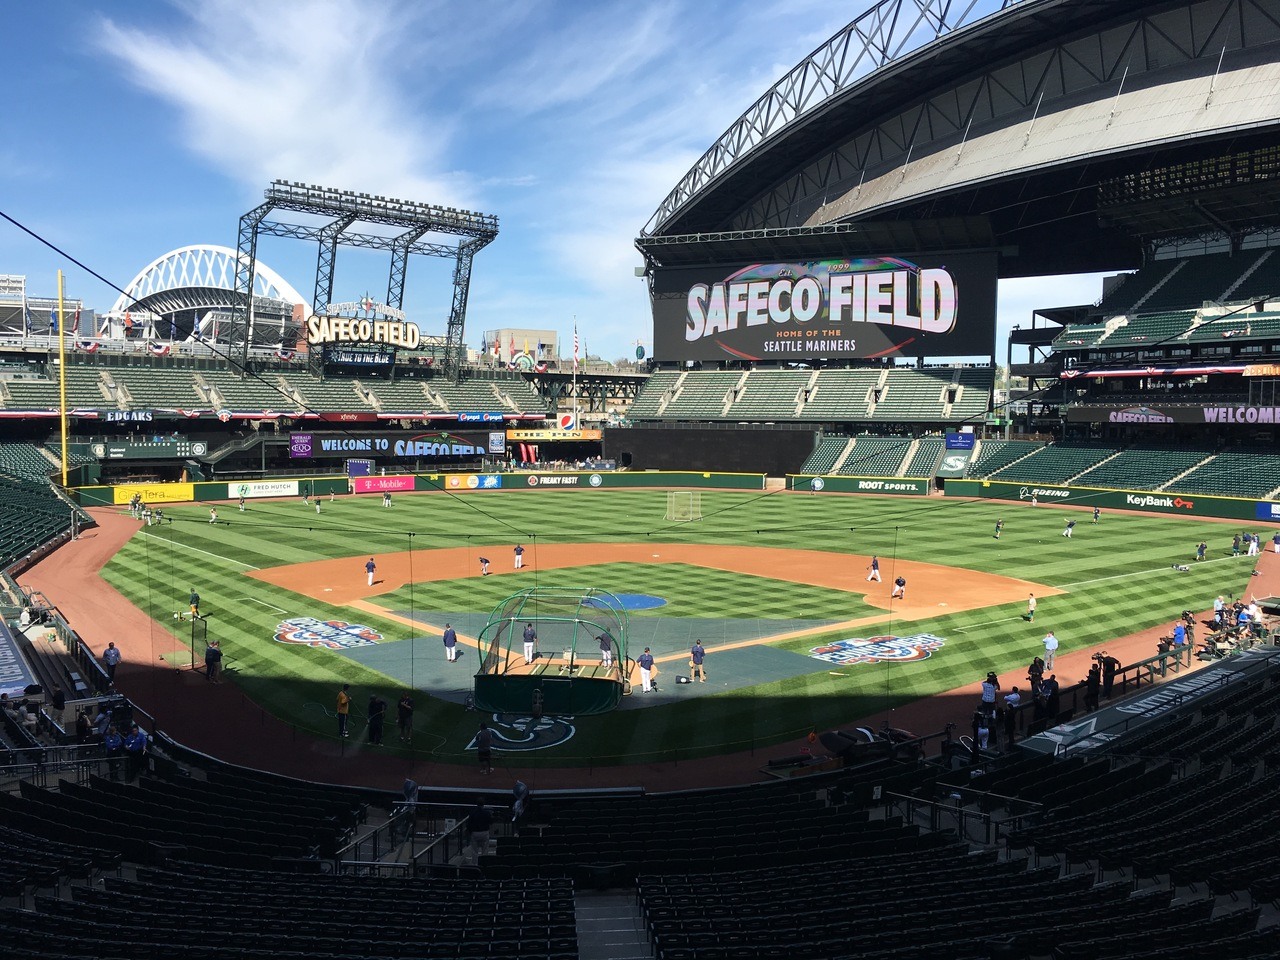 It’s a beautiful day at Safeco Field for the Seattle Mariners’ home opener against the Oakland Athletics.